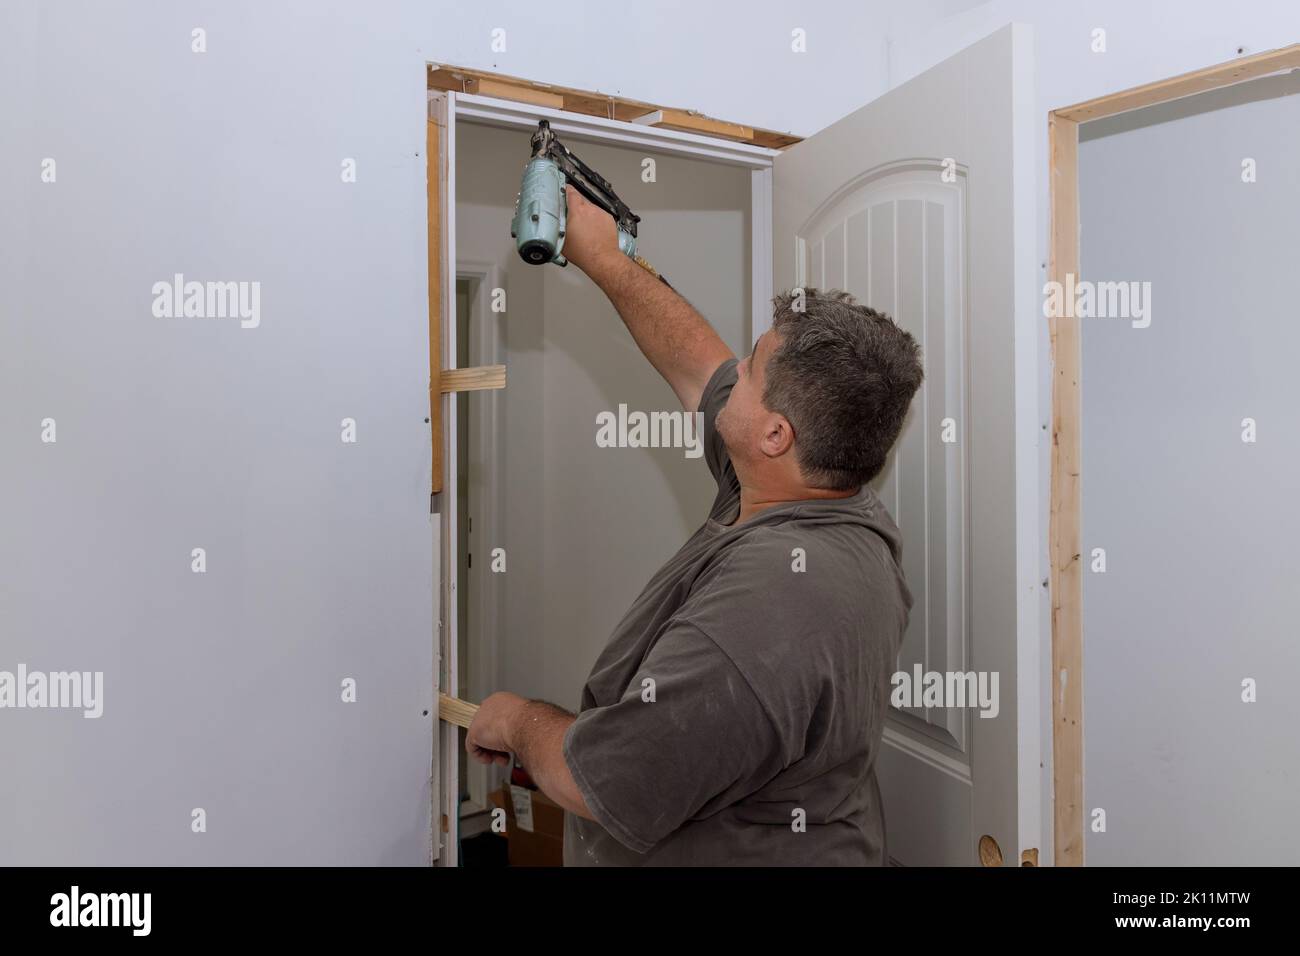 A trim carpenter installs interior doors in a newly constructed house as part of the construction process Stock Photo